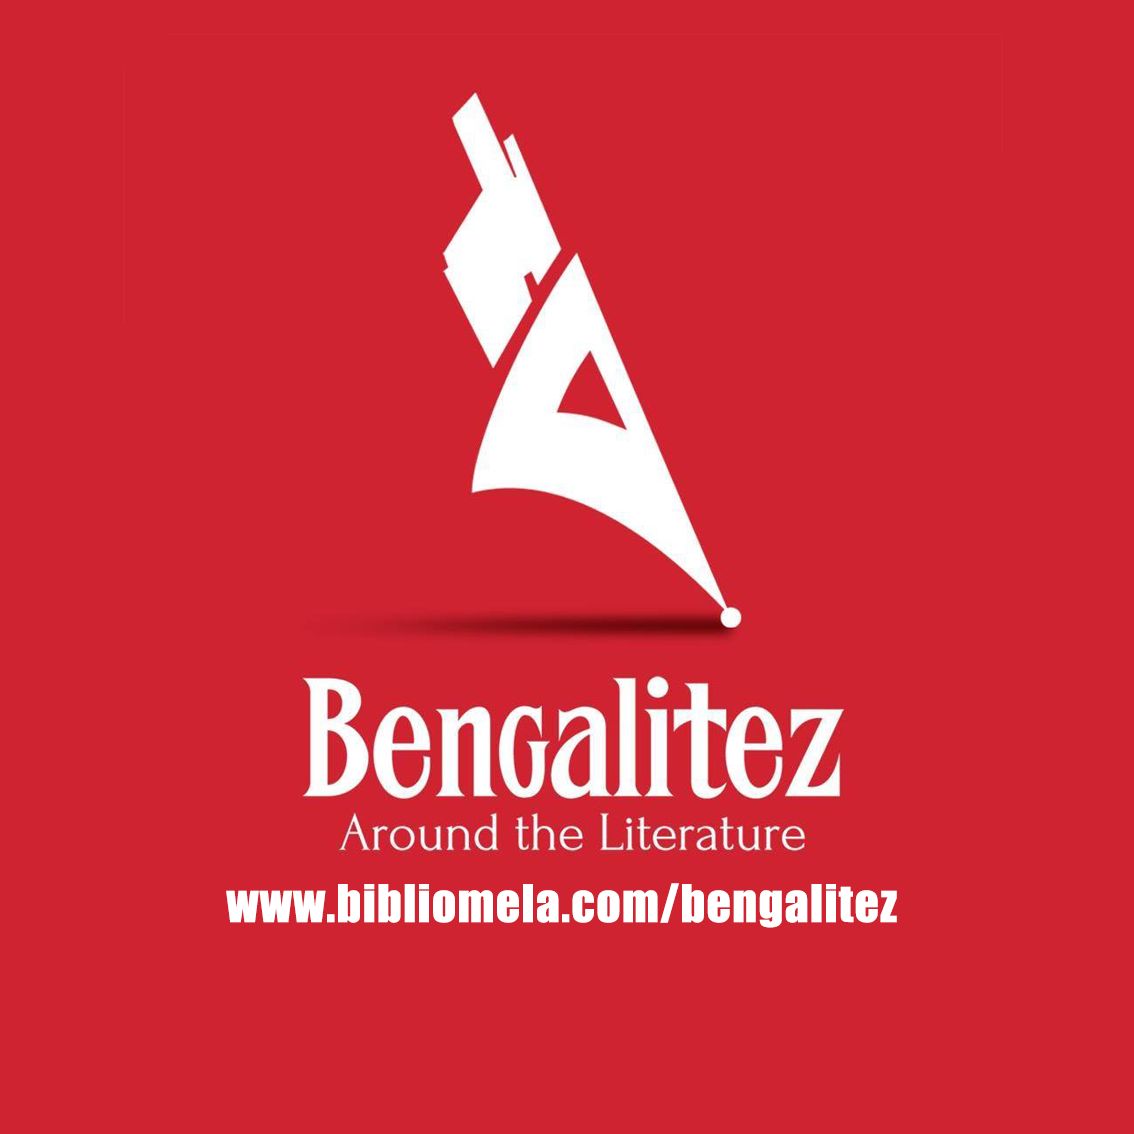 Bengalitez | Agency For Writers of Bengal